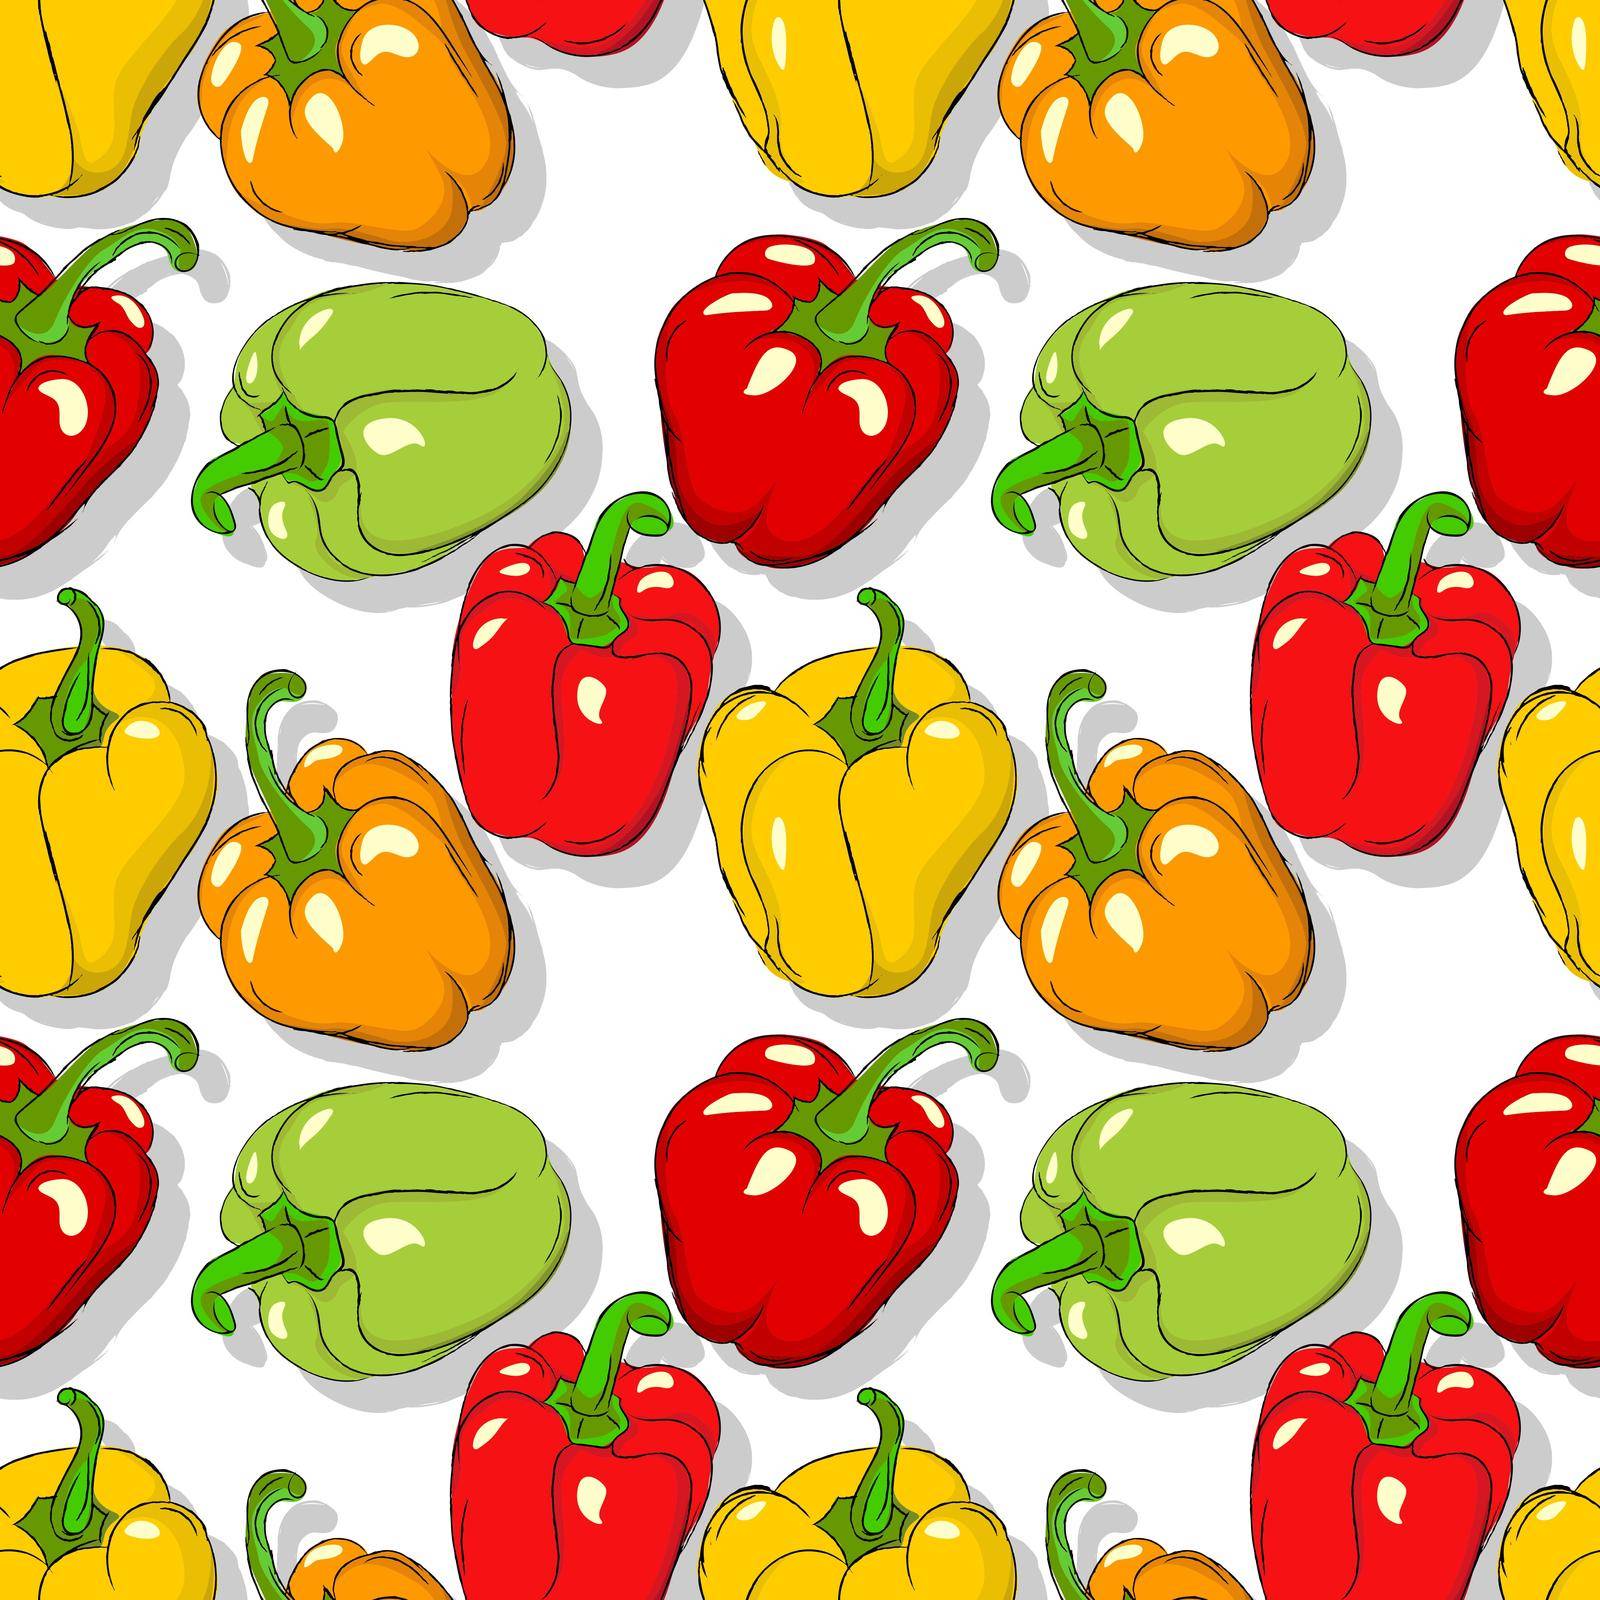 Bell peppers repeating pattern by Lirch